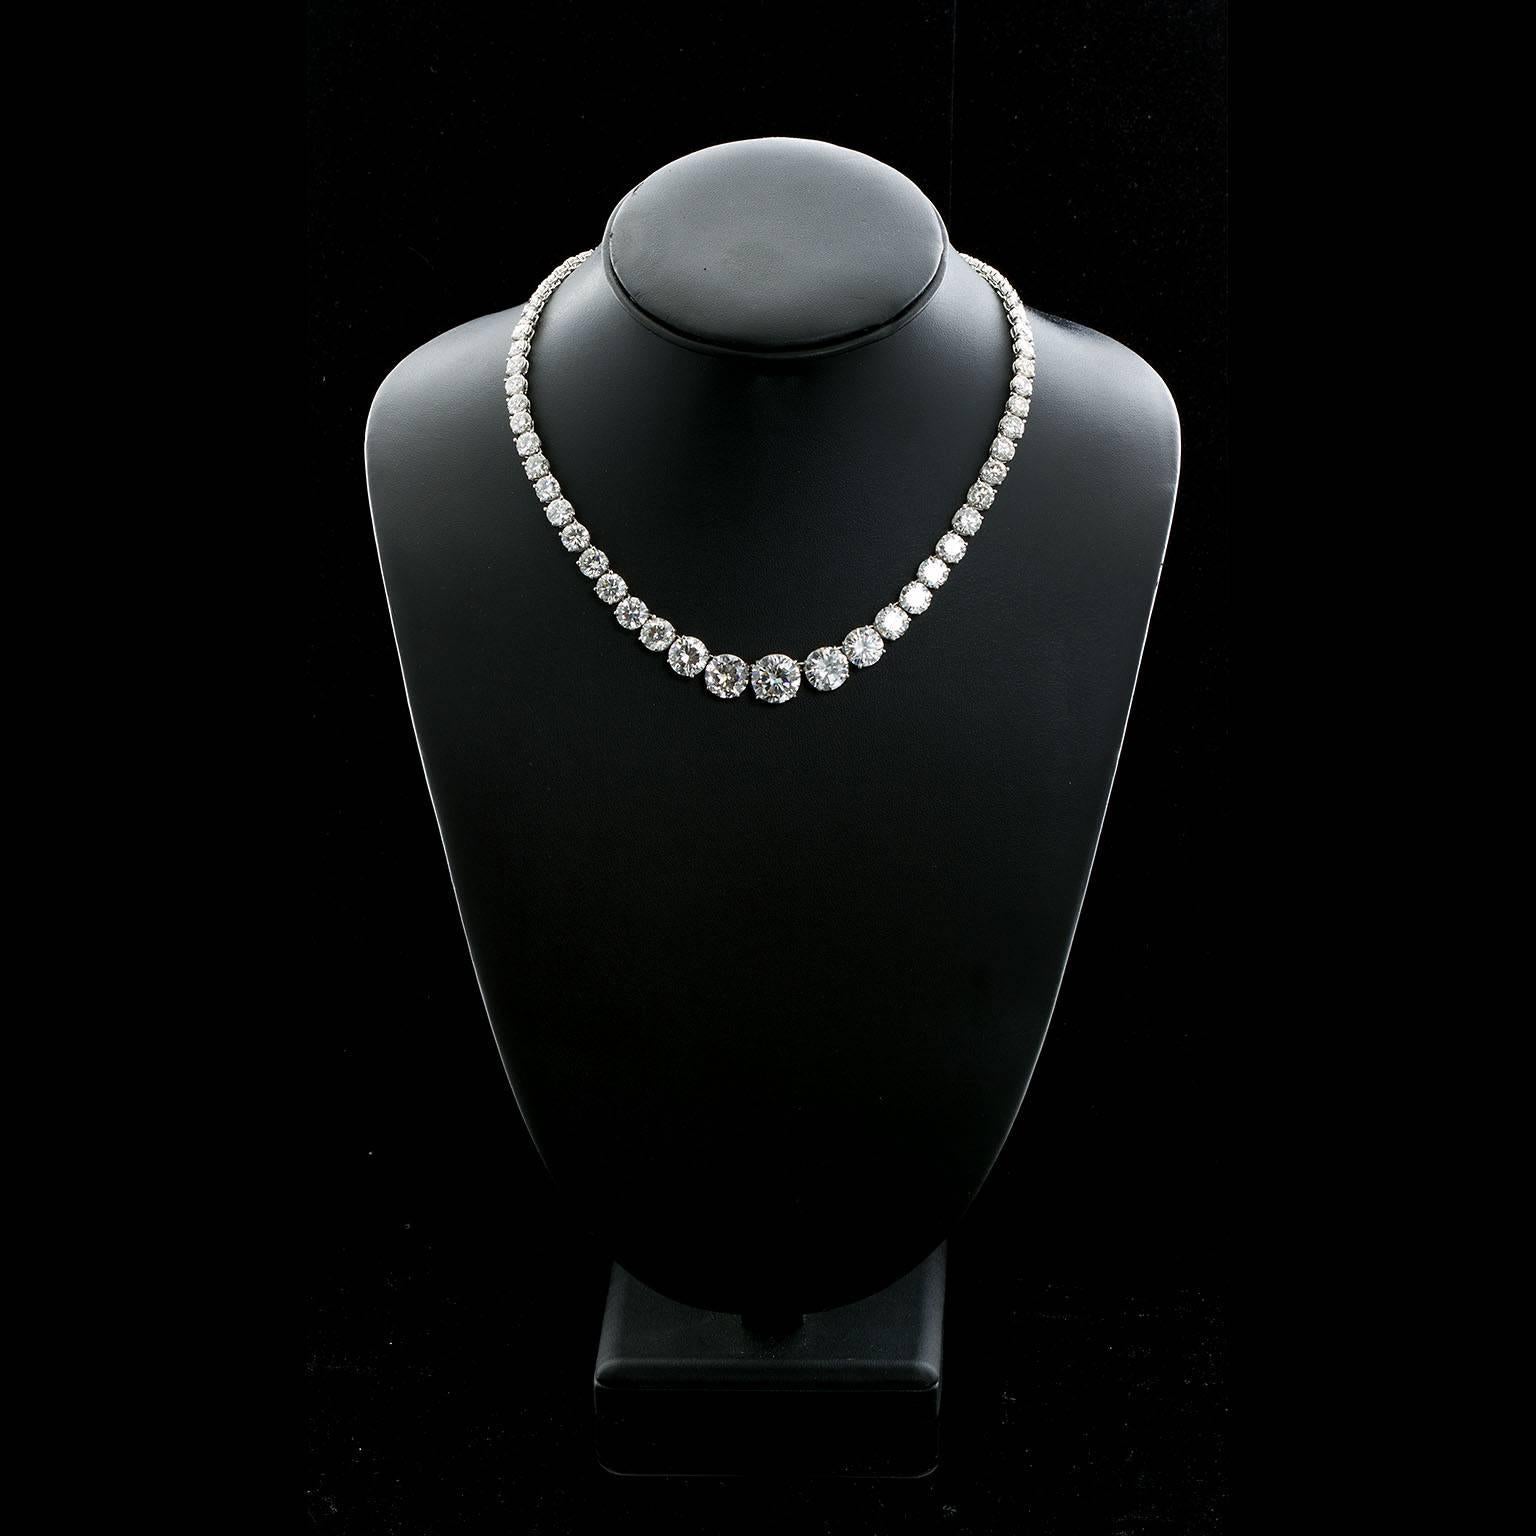 A diamond in platinum Rivière style necklace comprised of articulating links four-prong set with graduated round brilliant cut diamonds. The largest diamond is a 3.01 ct. J color VS1 clarity, then two four carat diamonds of similar color and clarity